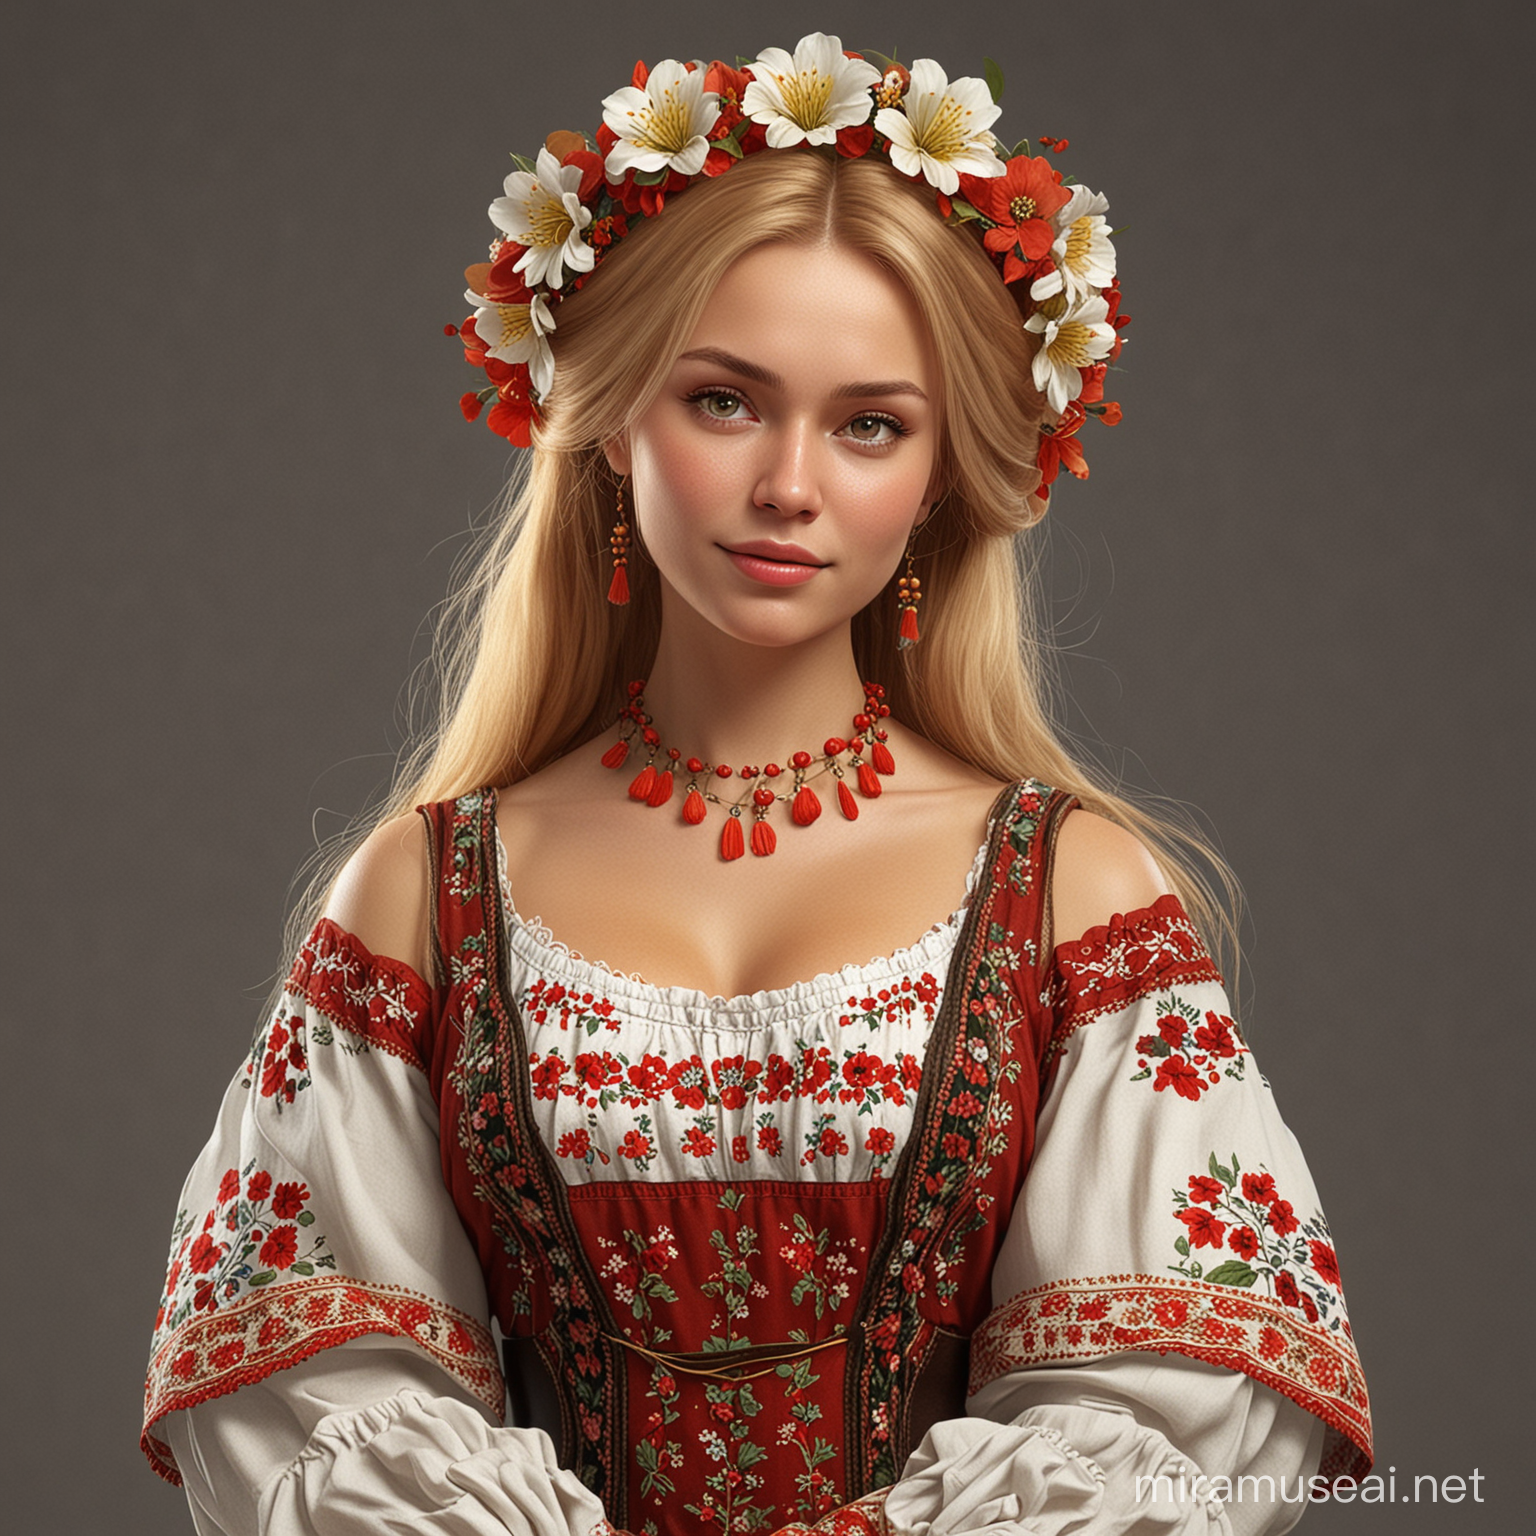 Embarrassed Russian Woman in Folk Costume with Flowers in Hair